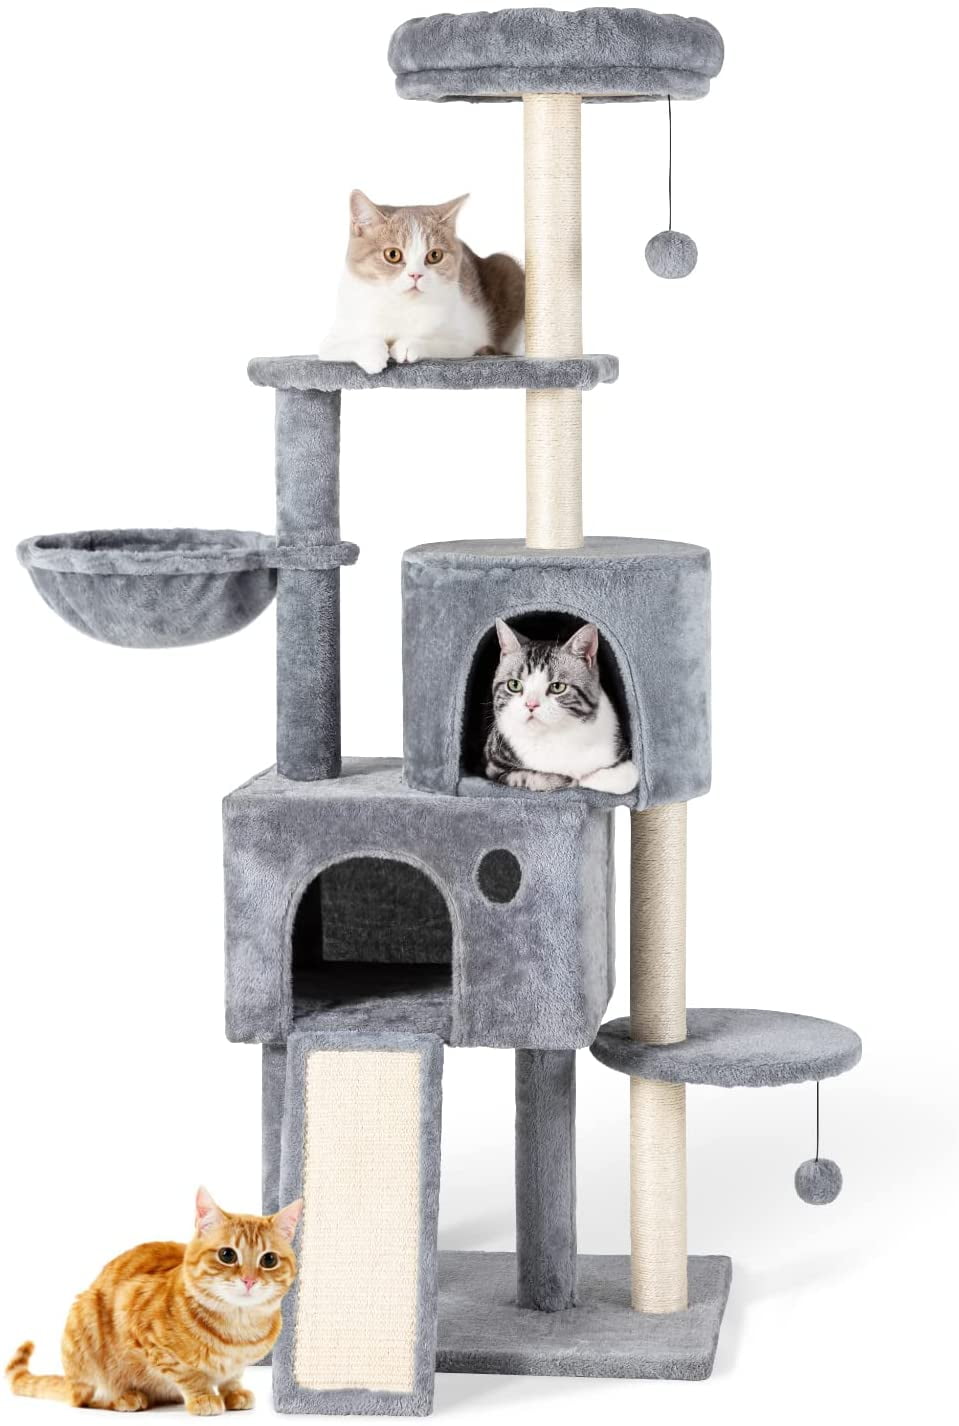 Cat Tower for Indoor Cats Cat Climbing Tower with Plush Hanging Ball Dark Grey Cat Tree with Cat Condo & Hammock Multi-Level Cat Tree with Scratching Posts for Kittens Cats Climbing and Scratching 